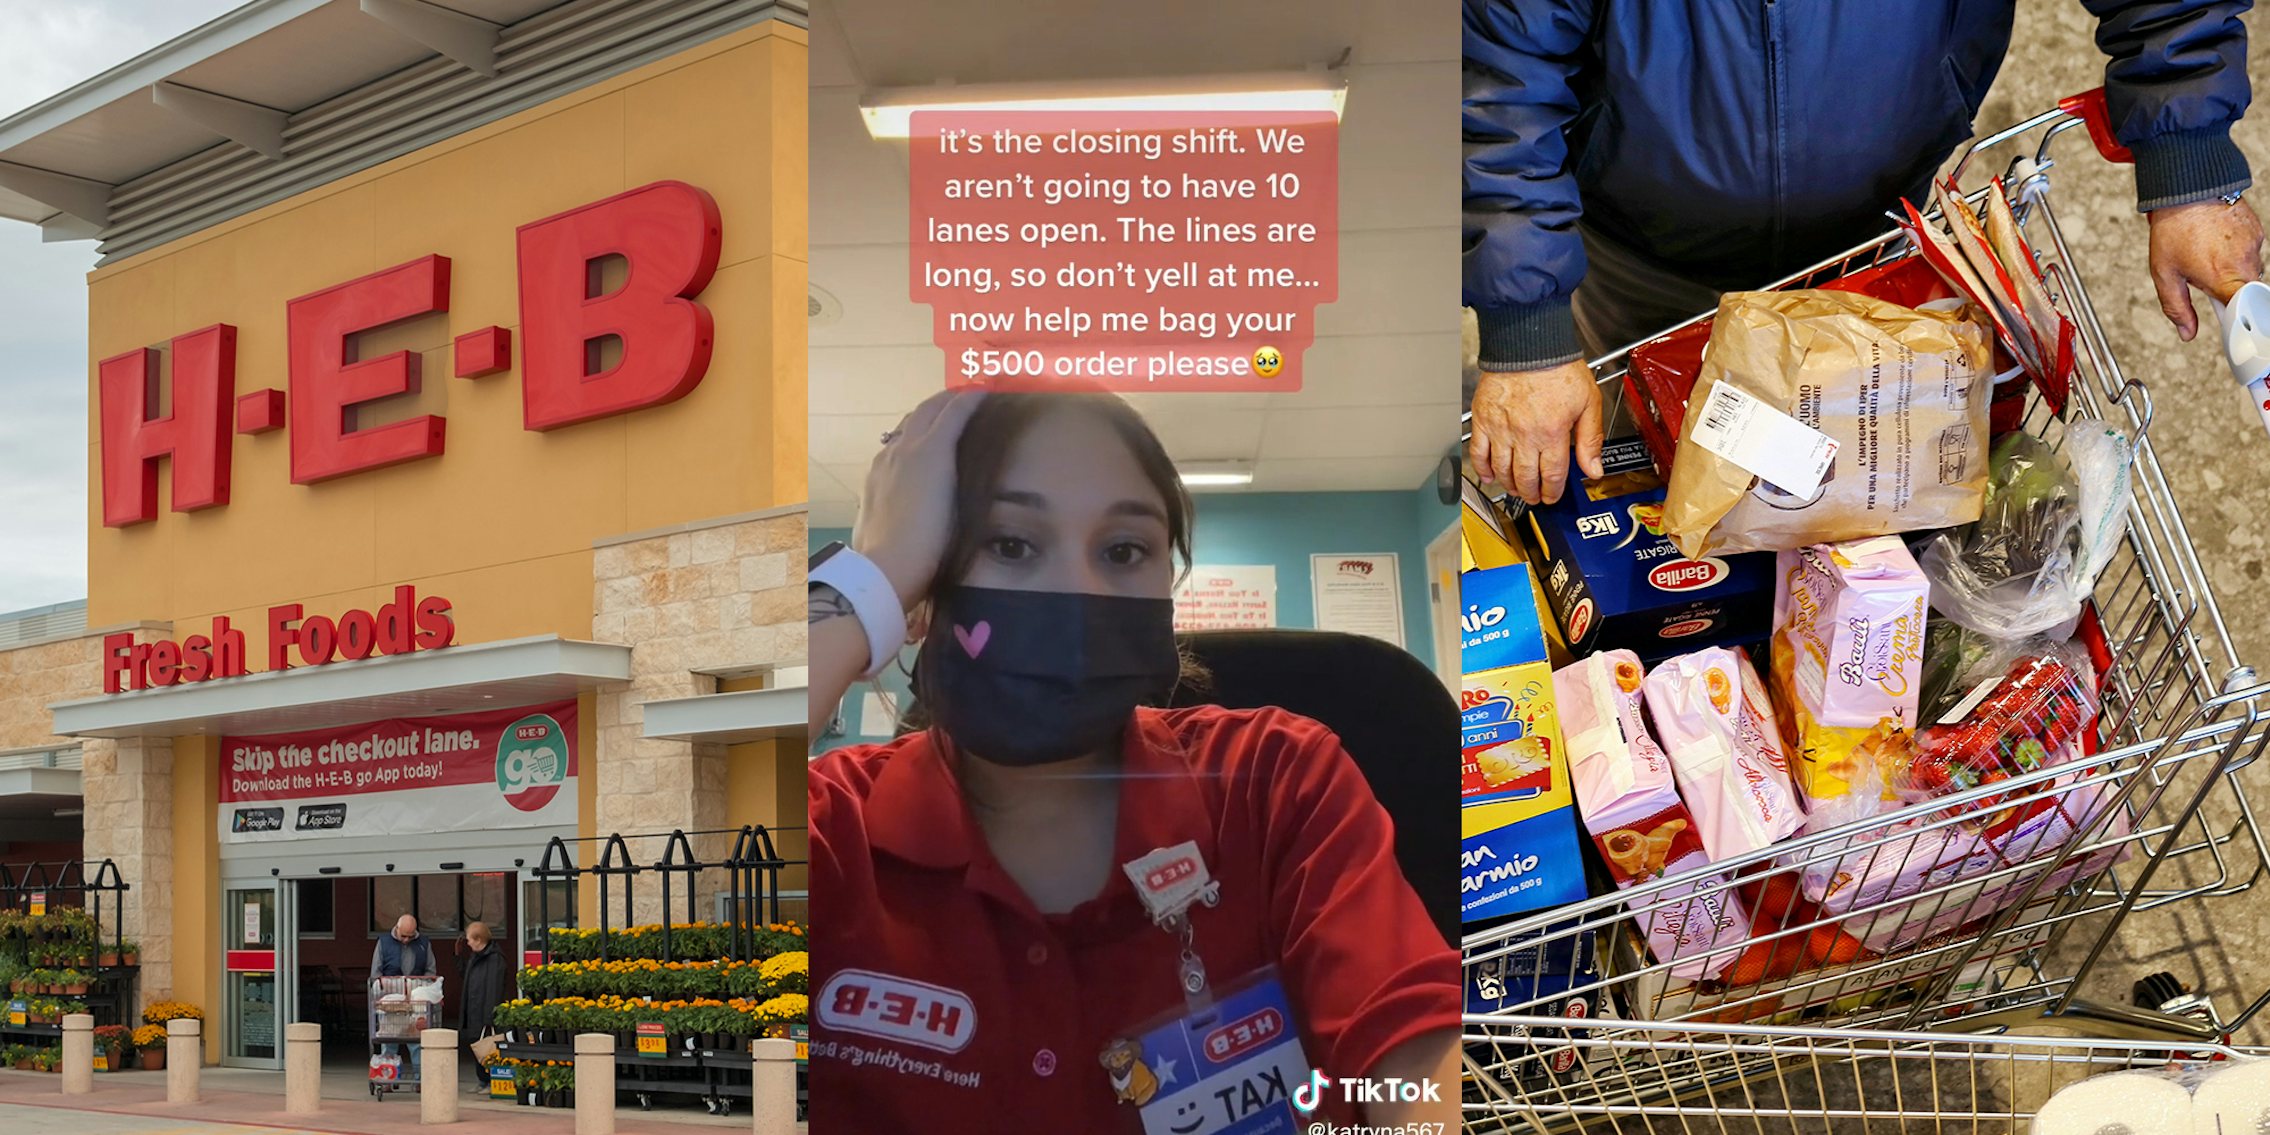 H E B sign (l) H E B employee with caption 'it's the closing shift. We aren't going to have 10 lanes open. The lines are long, so don't yell at me.. now help me bag your $500 order please' (c) man with full grocery cart (r)